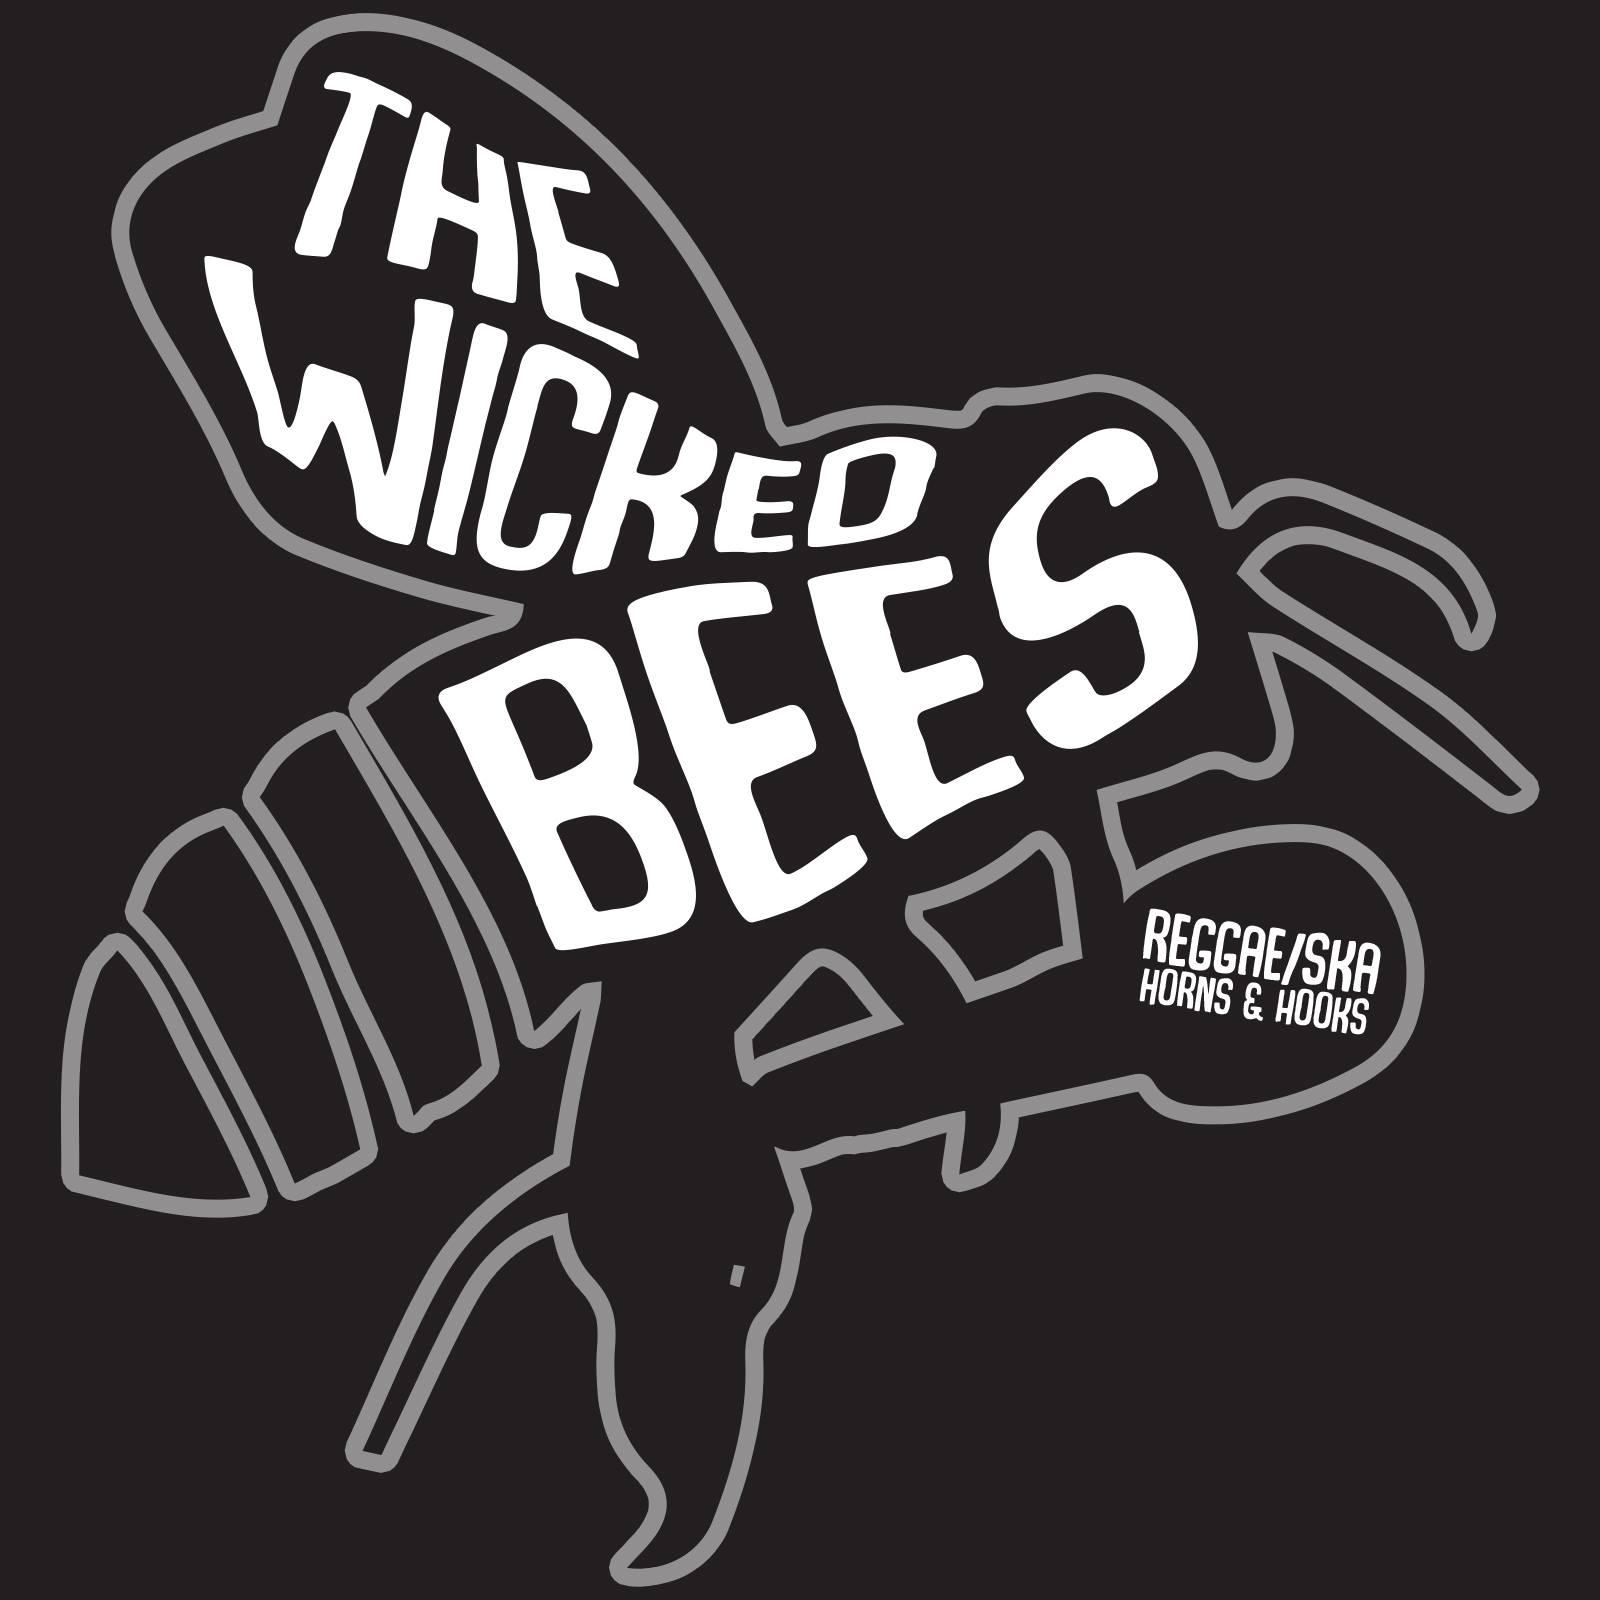 The Wicked Bees